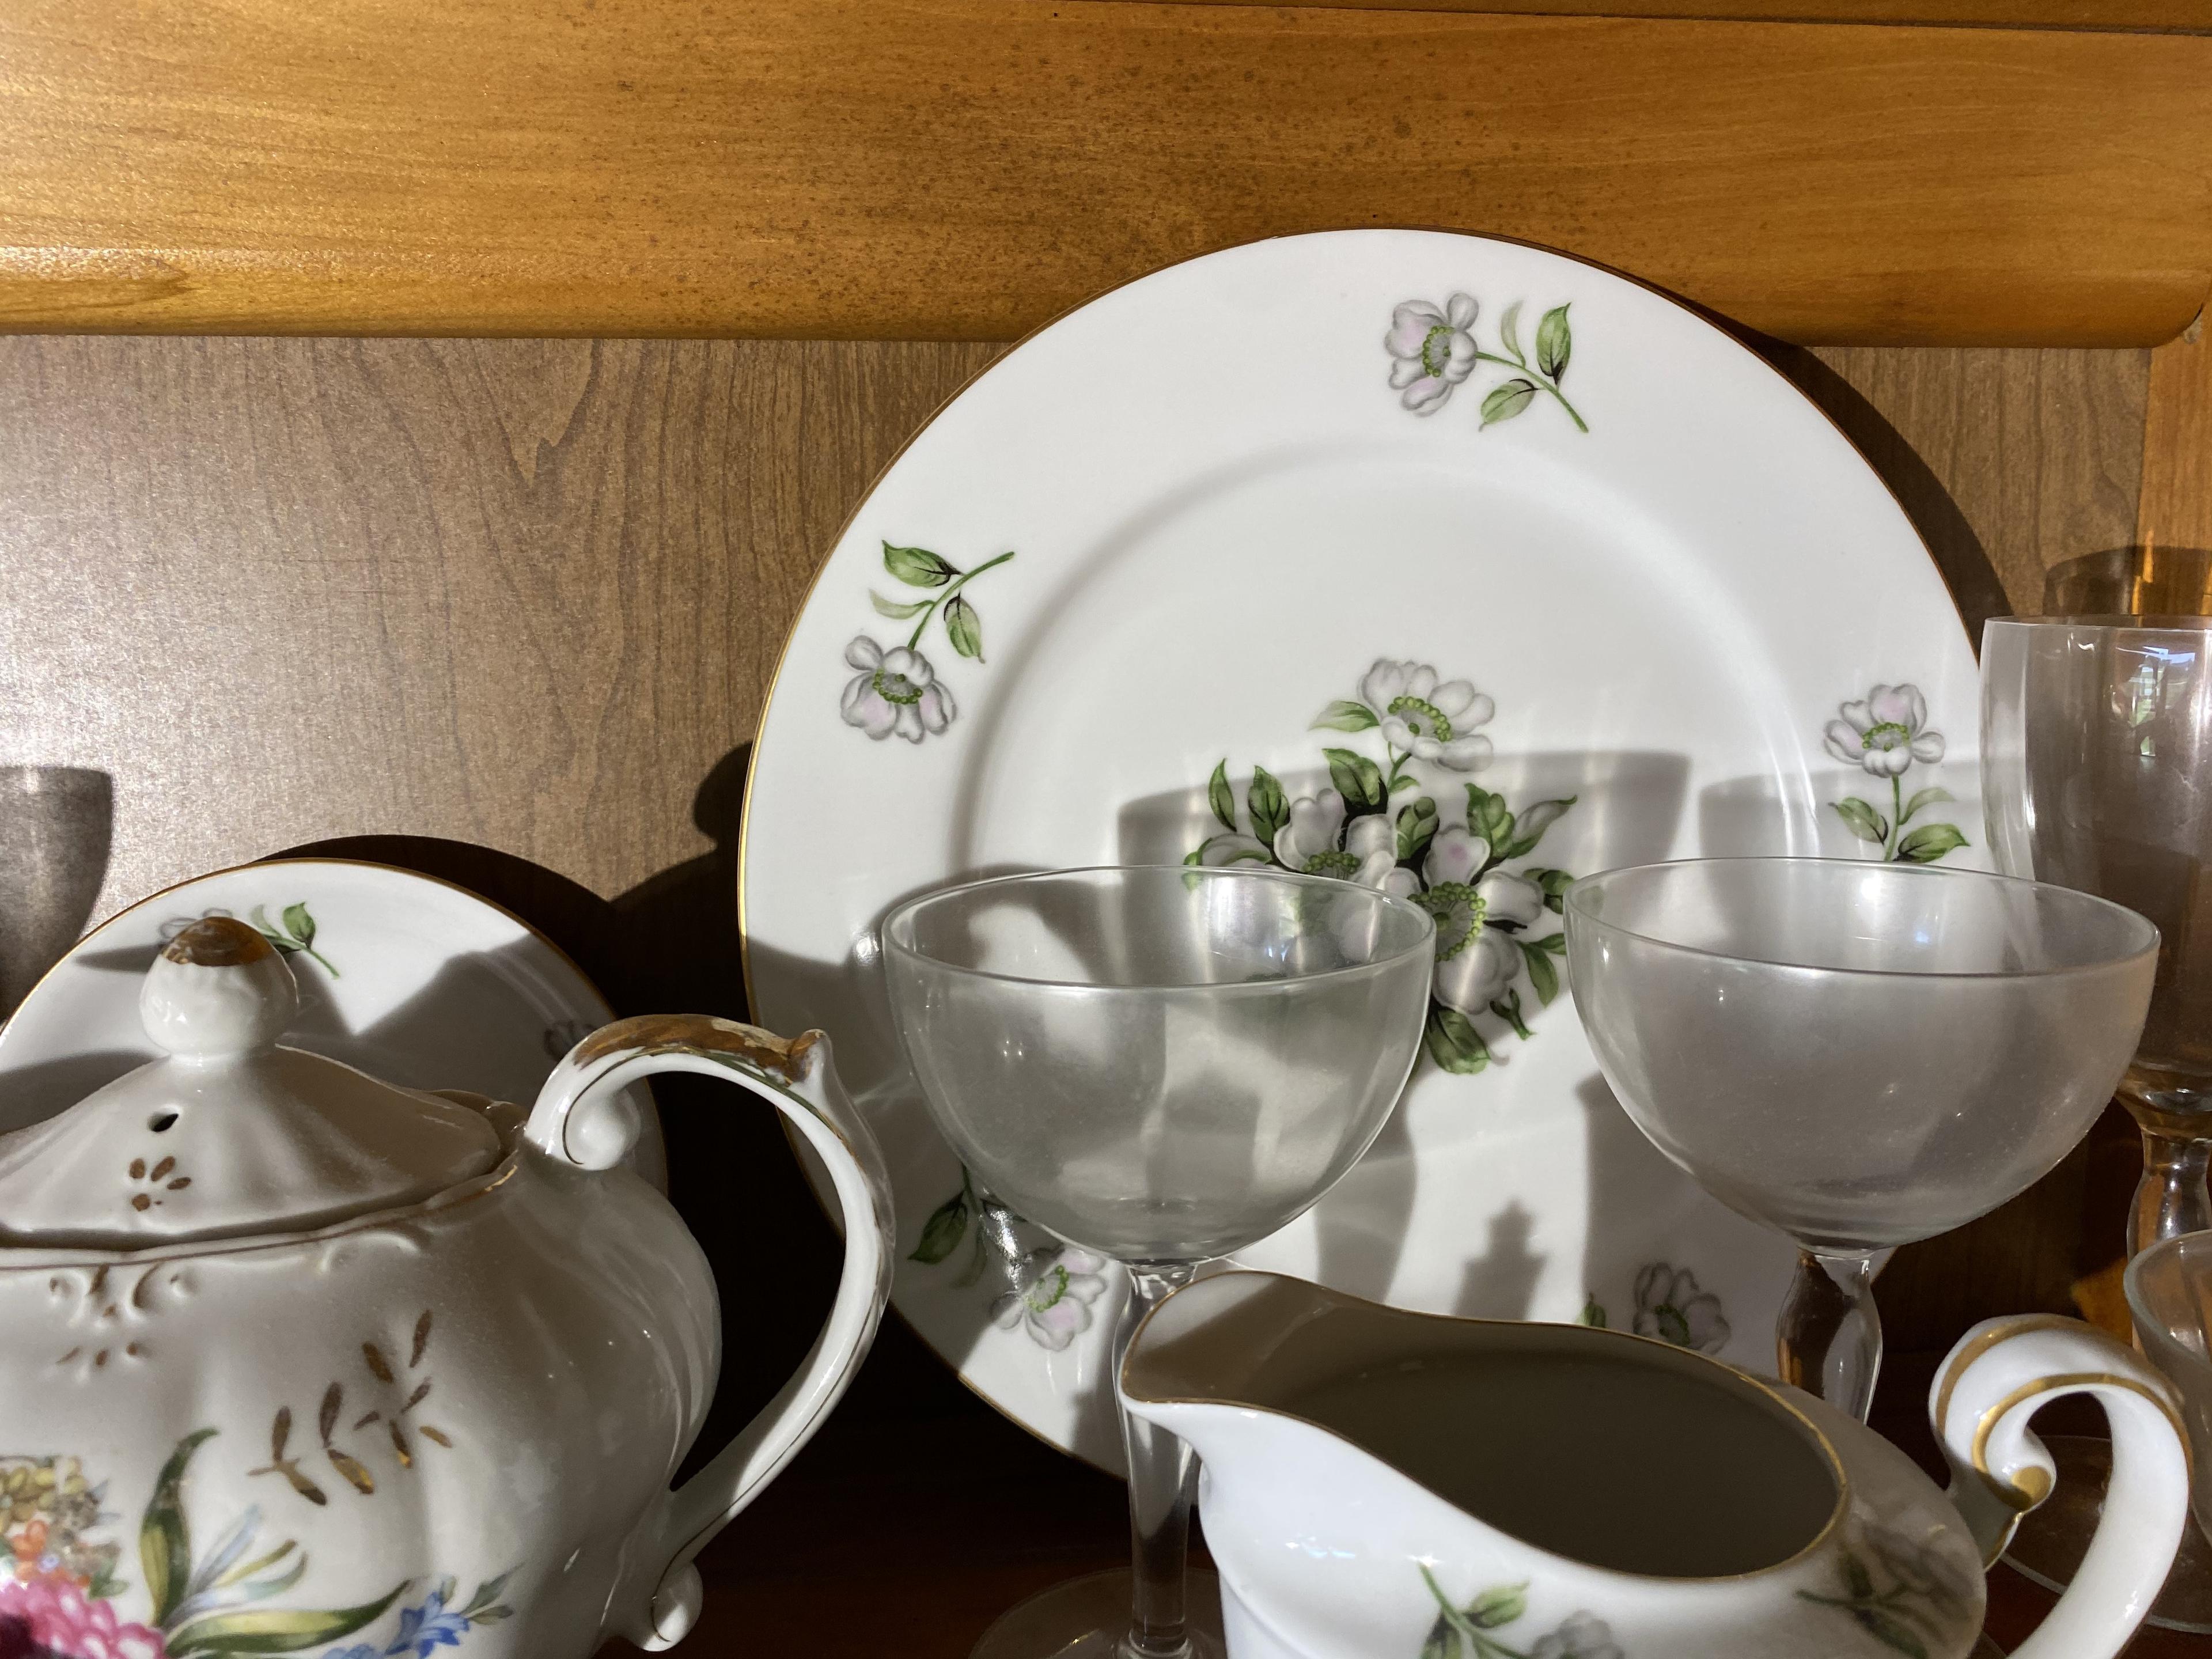 Contents of Hutch - Large China Set